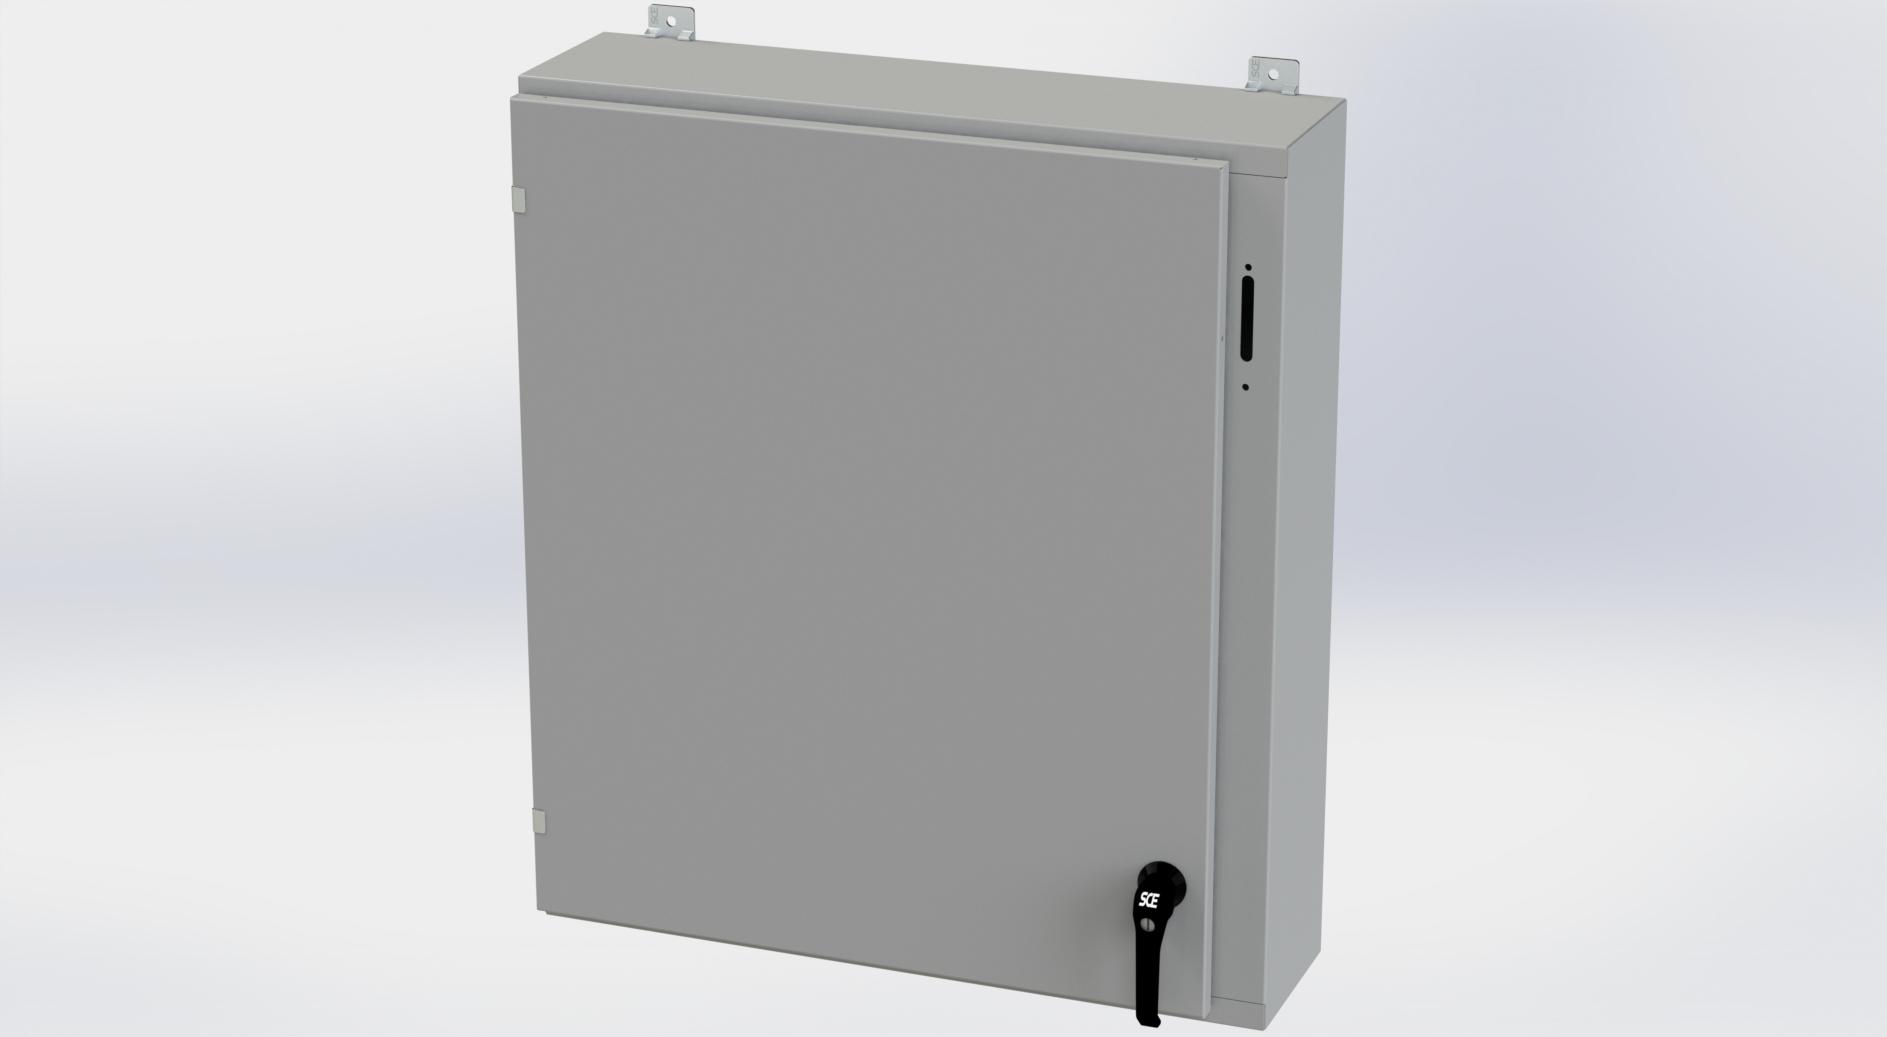 Saginaw Control SCE-36SA3208LPPL Obselete Use SCE-36XEL3108LP, Height:36.00", Width:31.38", Depth:8.00", ANSI-61 gray powder coating inside and out. Optional sub-panels are powder coated white.